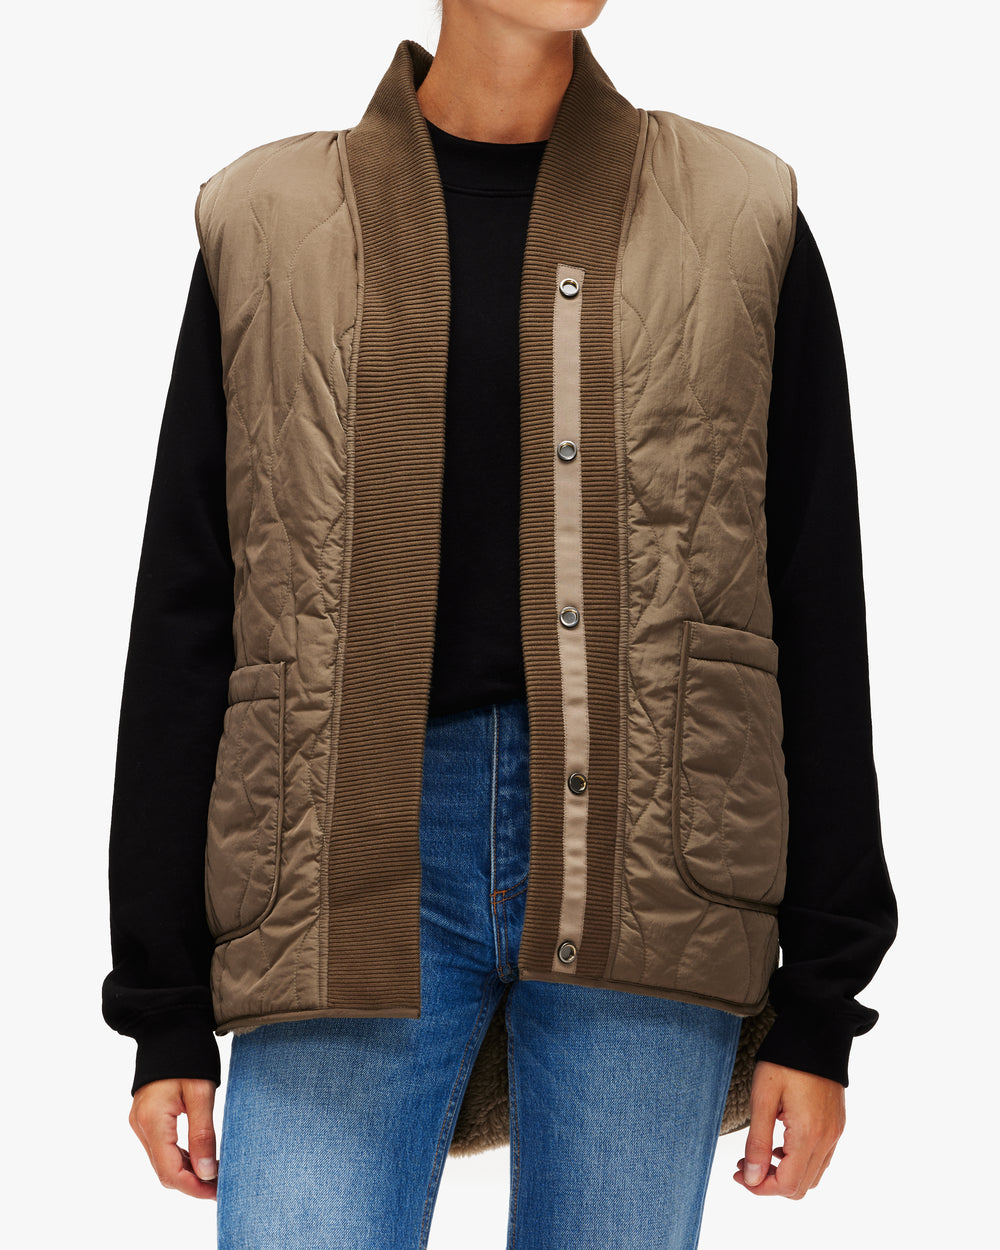 Varley Covey Reversible Quilt Gilet